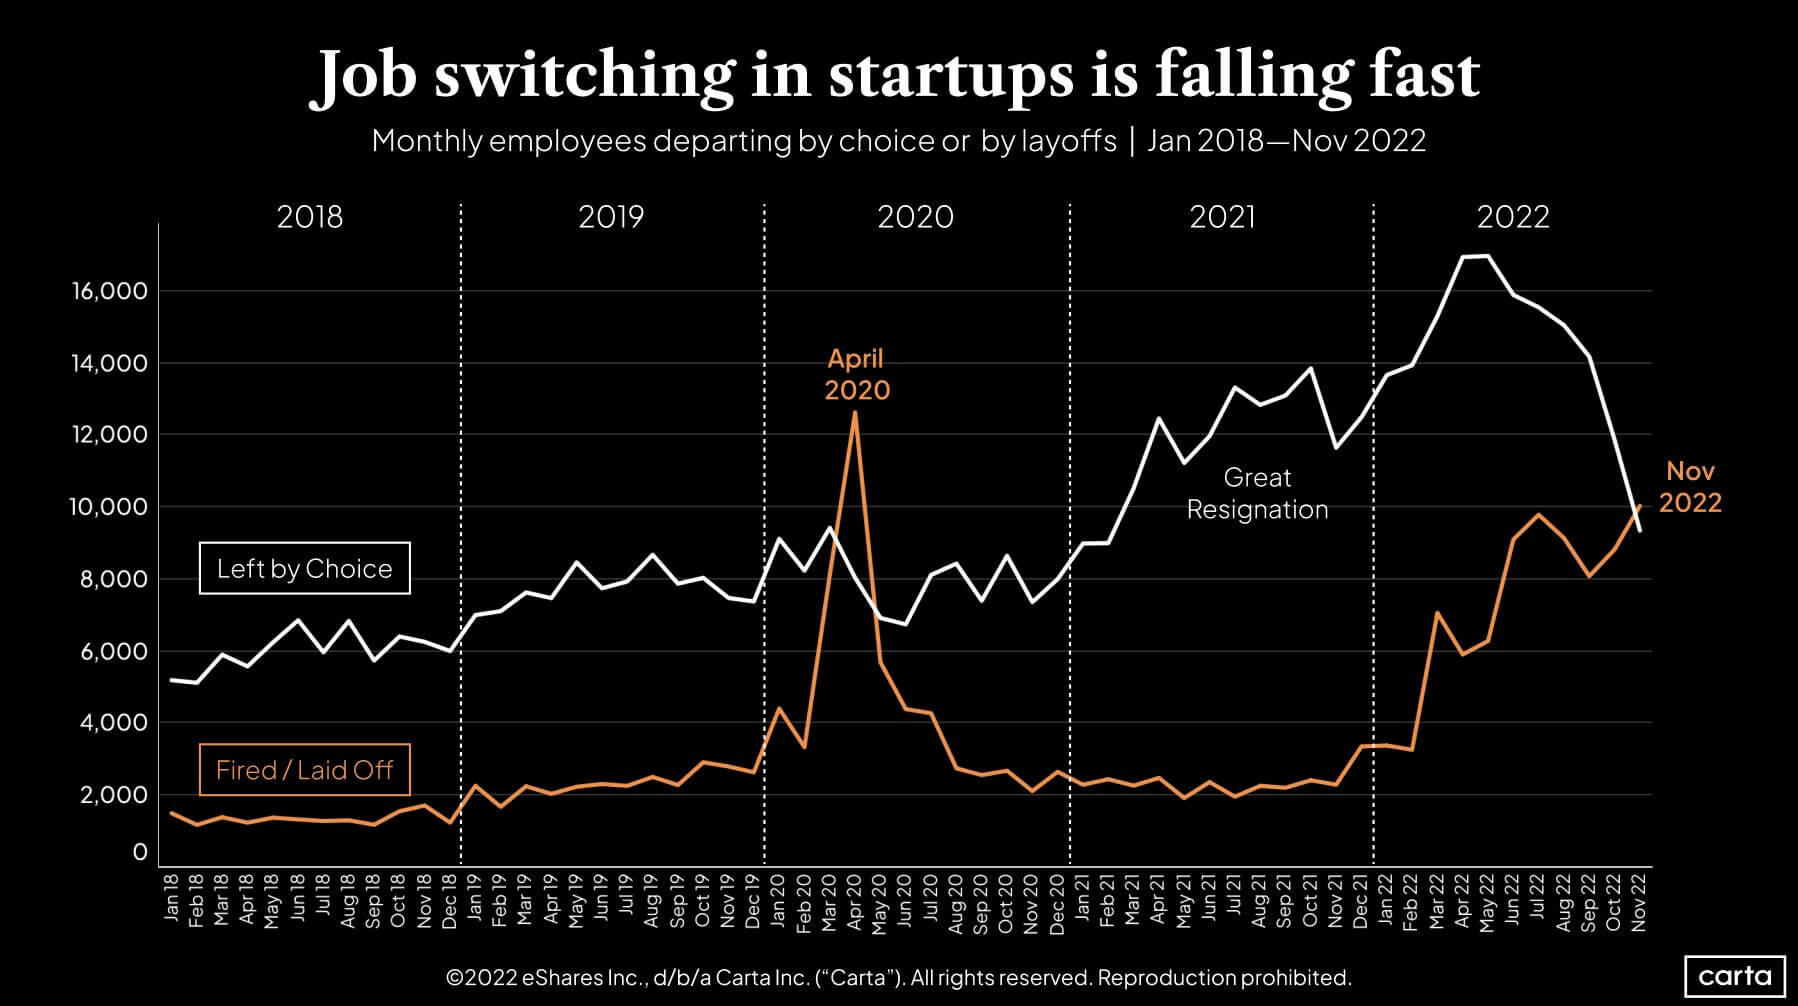 Job switching in startups is falling fast